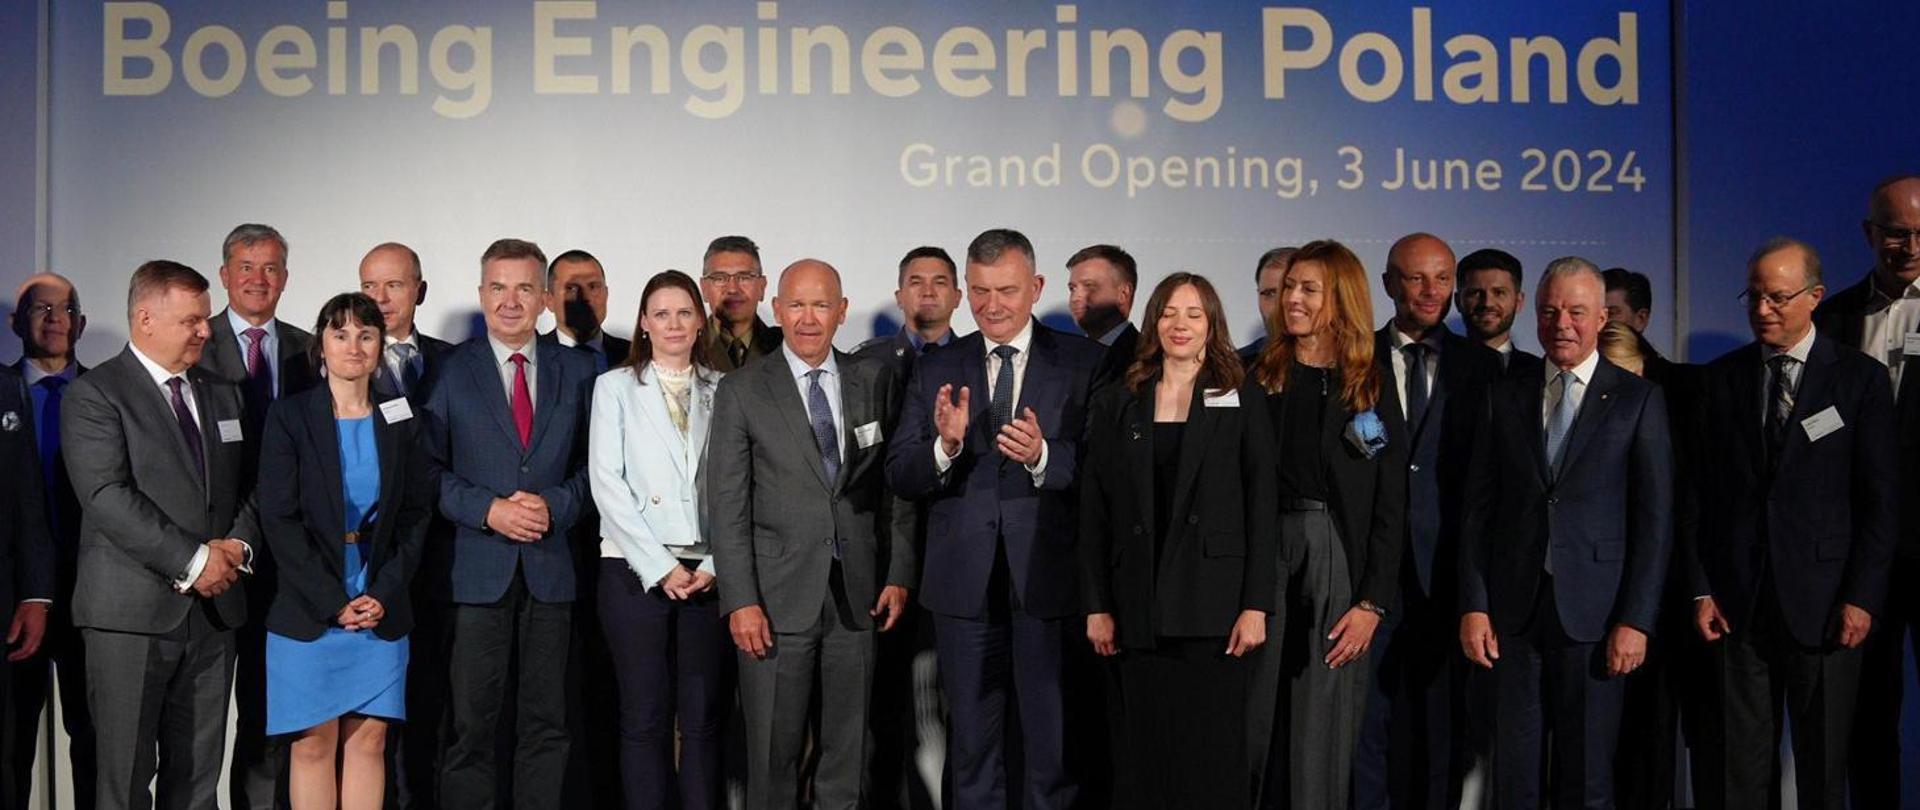 Minister Dariusz Wieczorek attends the opening of the Boeing Engineering Centre in Warsaw